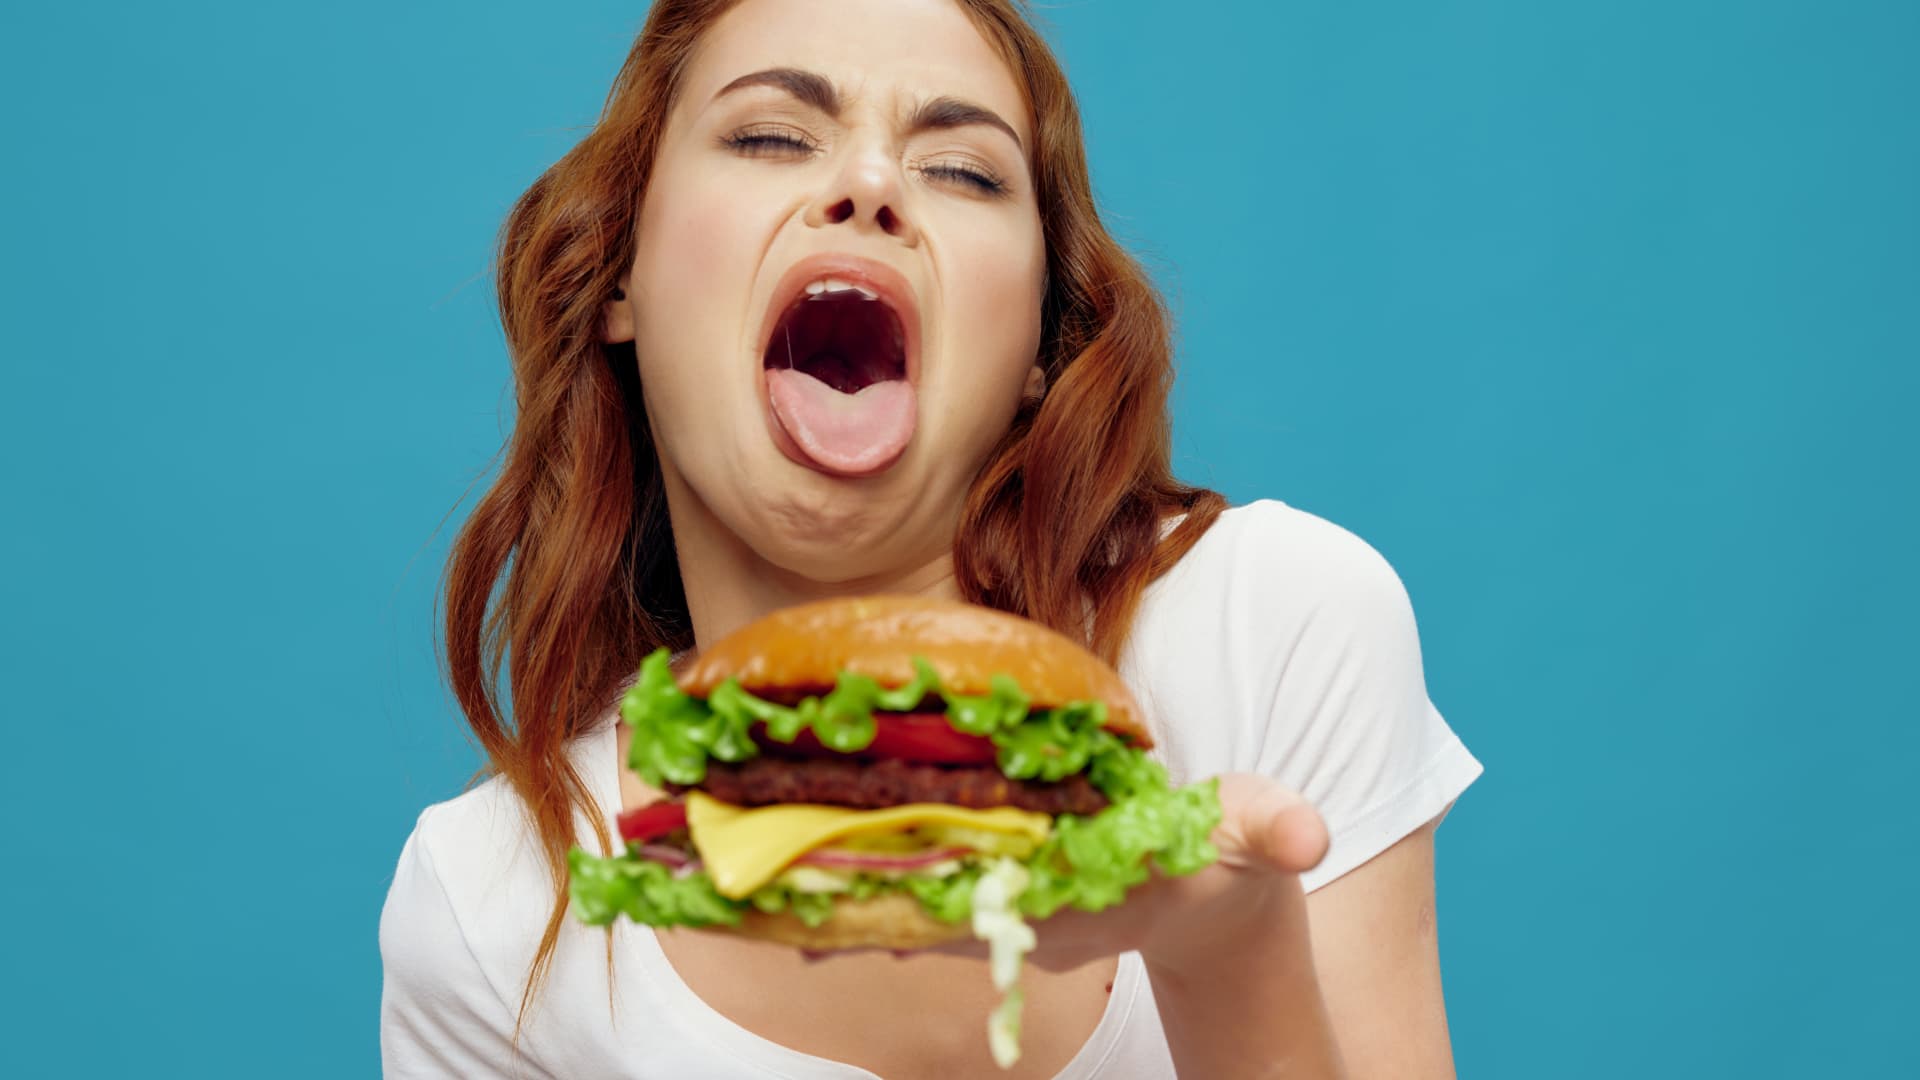 Harvard nutritionist: 4 toxic food additives that 'actually make you hungrier' and 'hijack the brain'—eat this instead